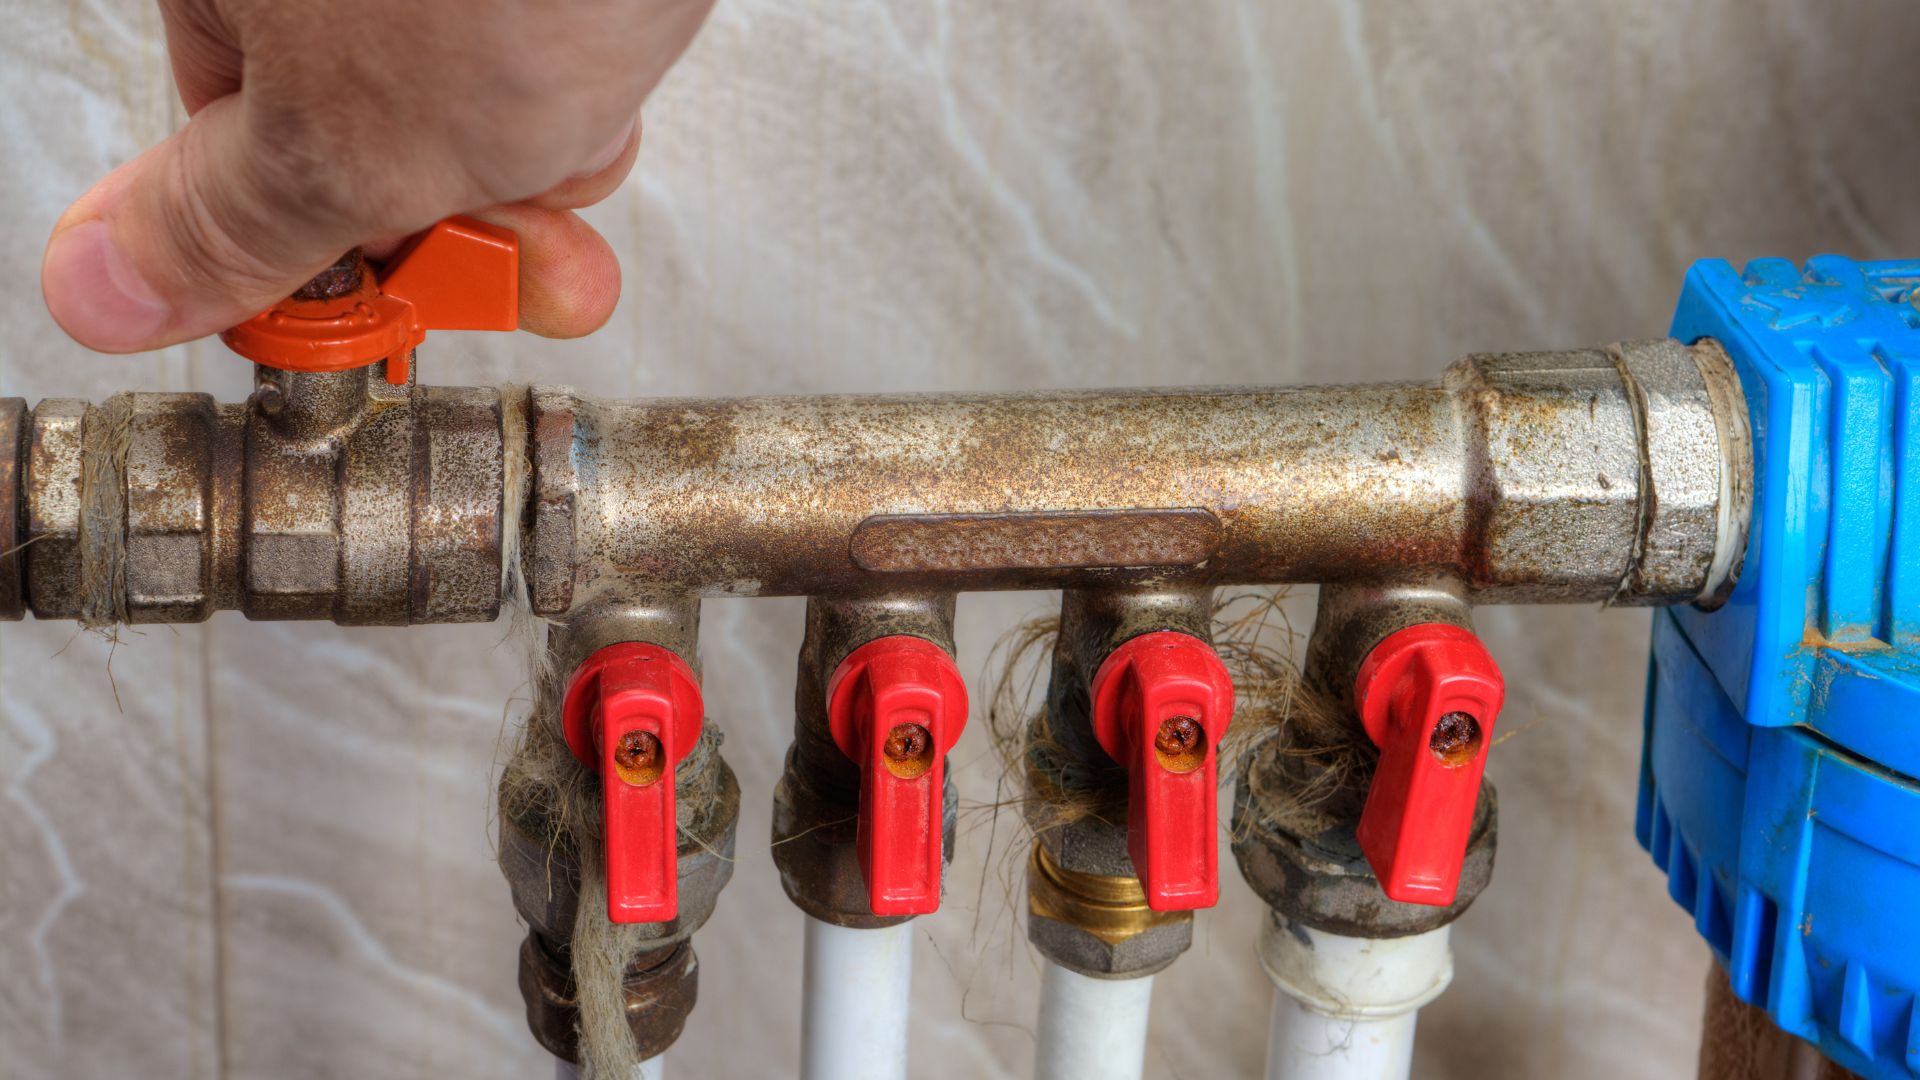 Turn off the primary water supply with the assistance of professional plumbers.